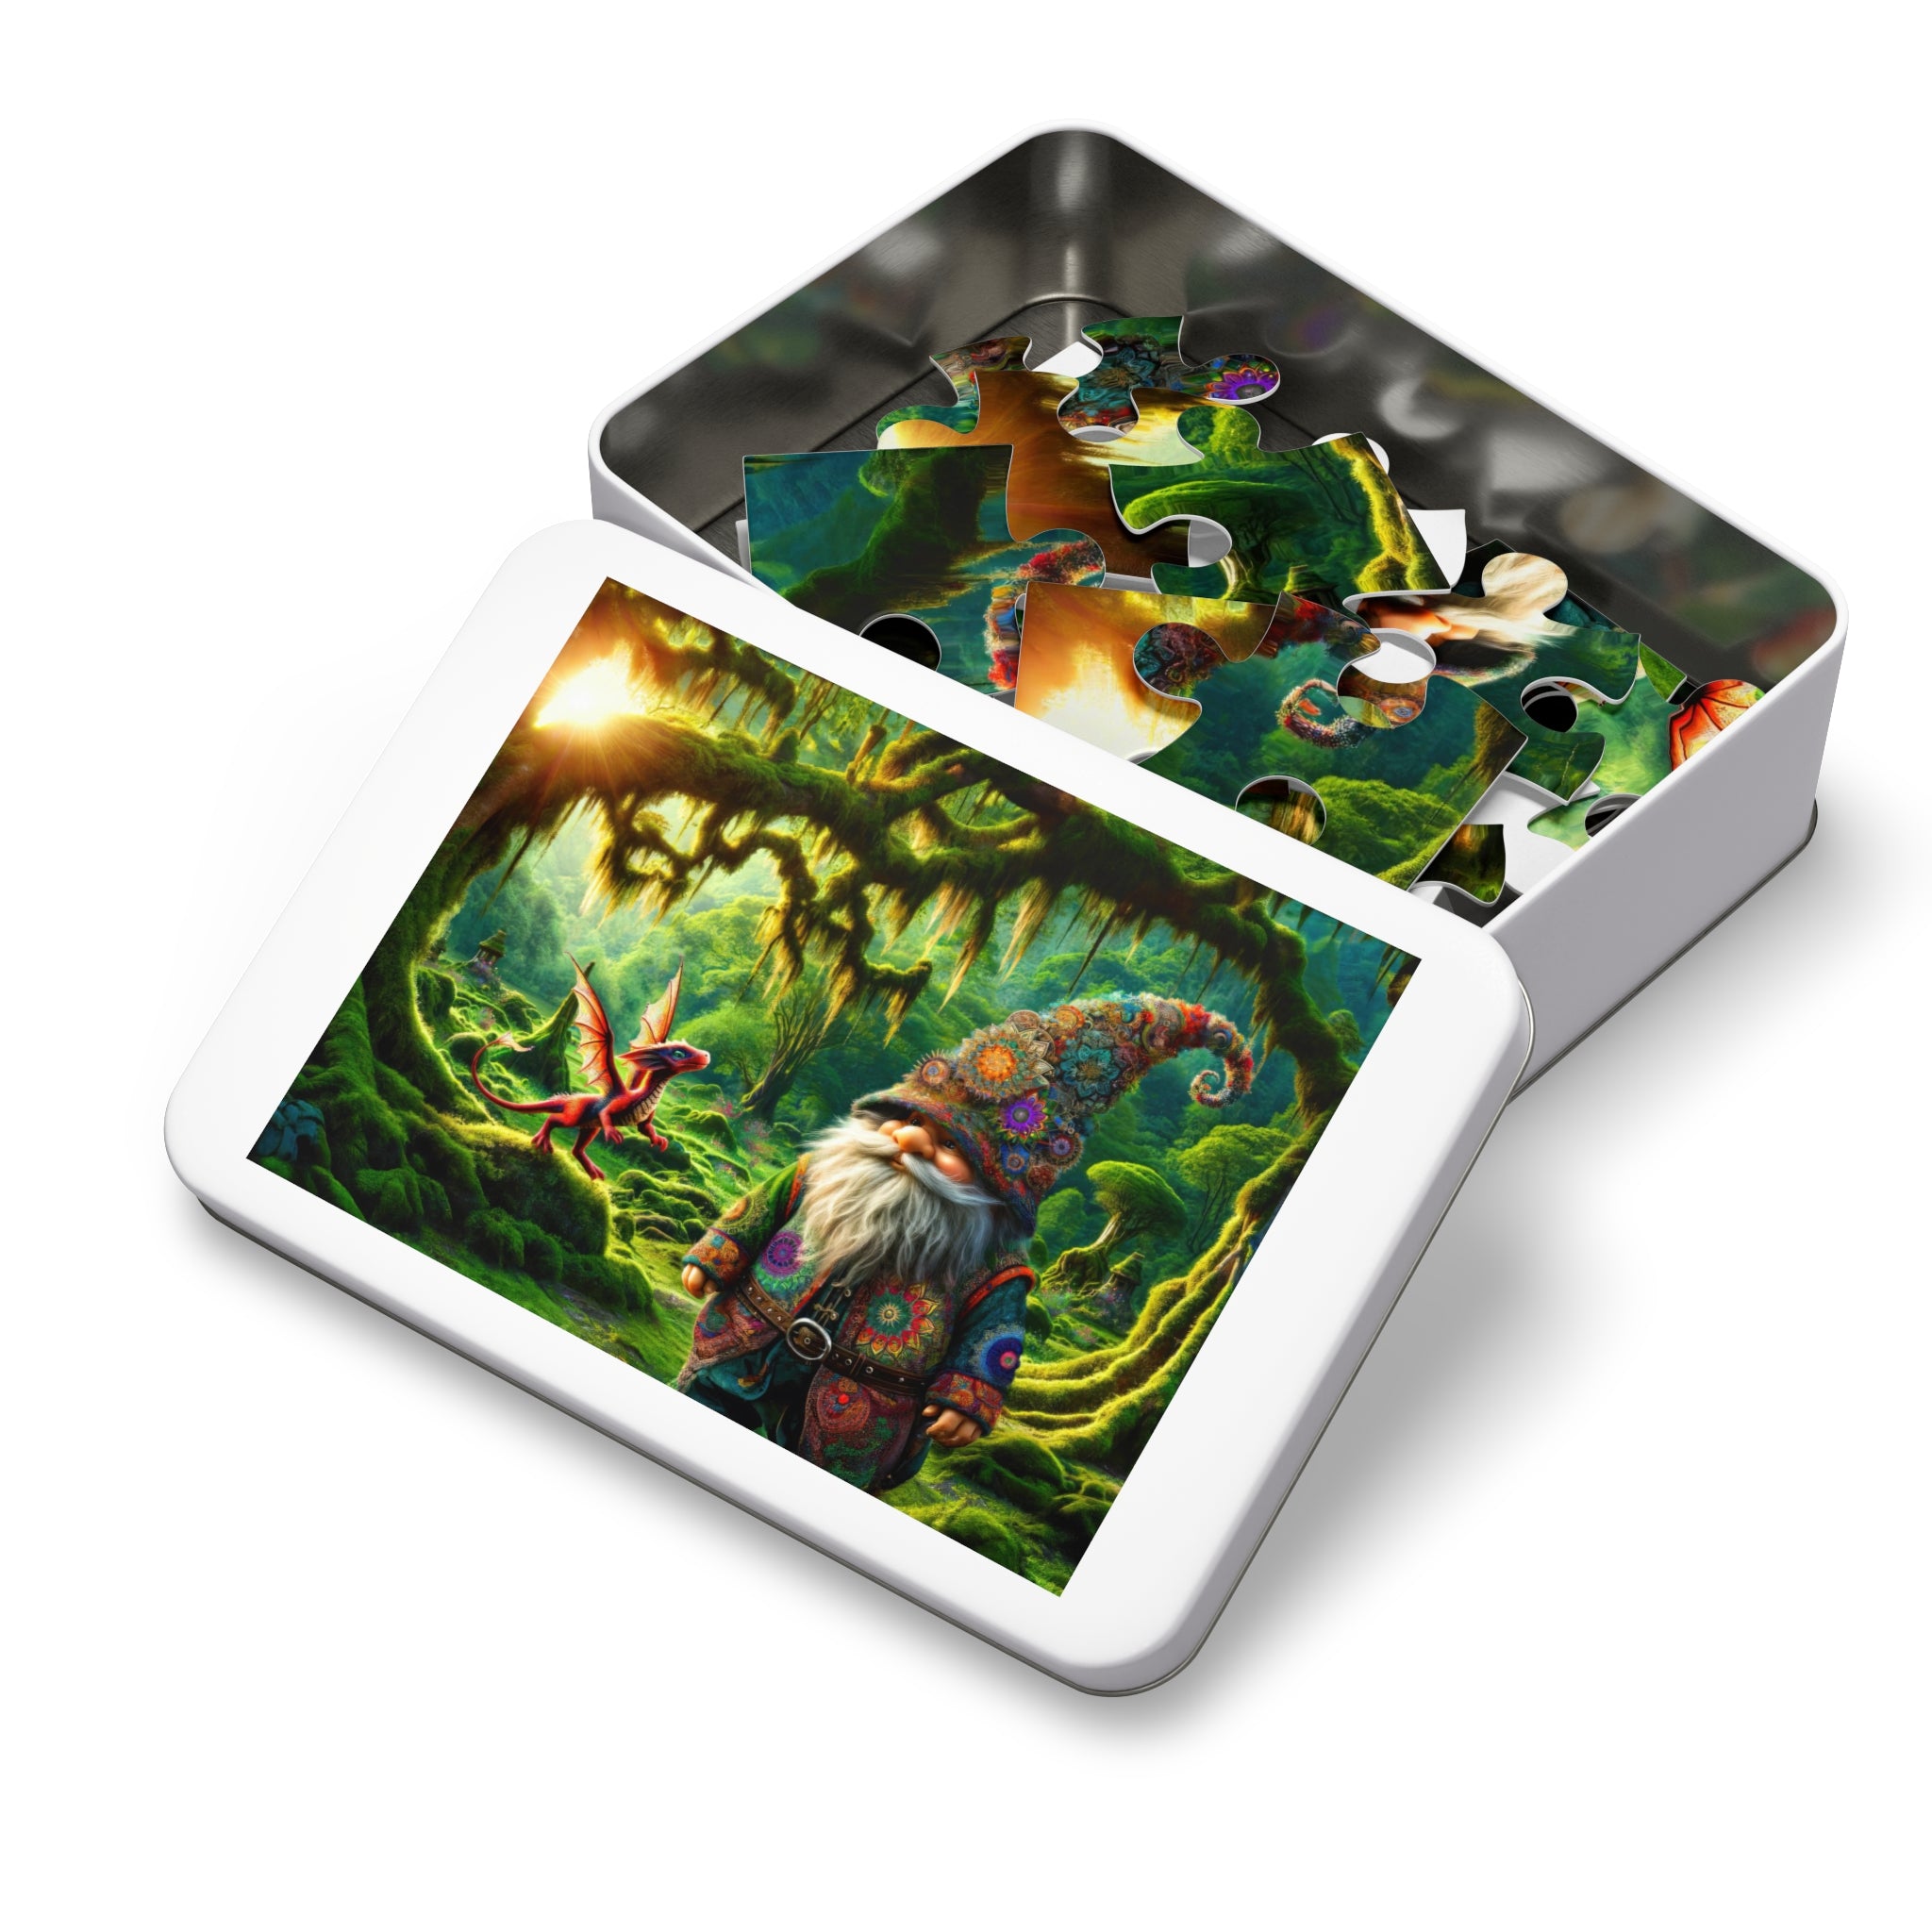 Whispers of the Enchanted Grove Jigsaw Puzzle